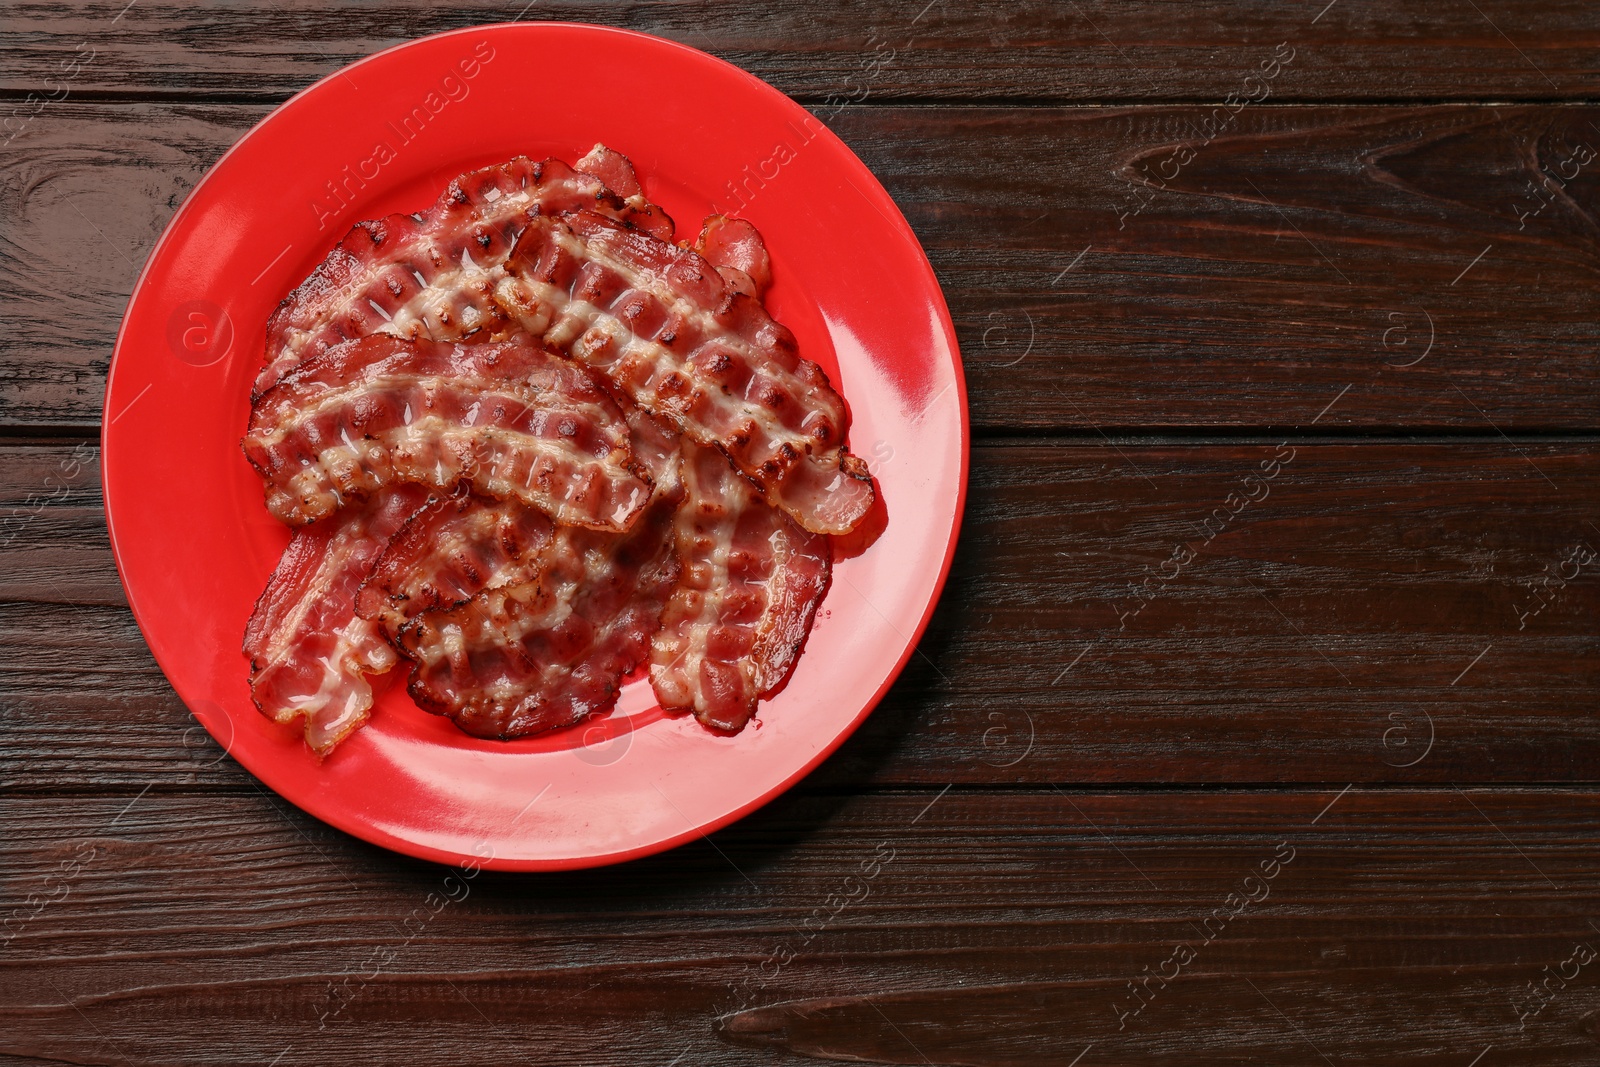 Photo of Plate with fried bacon slices on wooden table, top view. Space for text